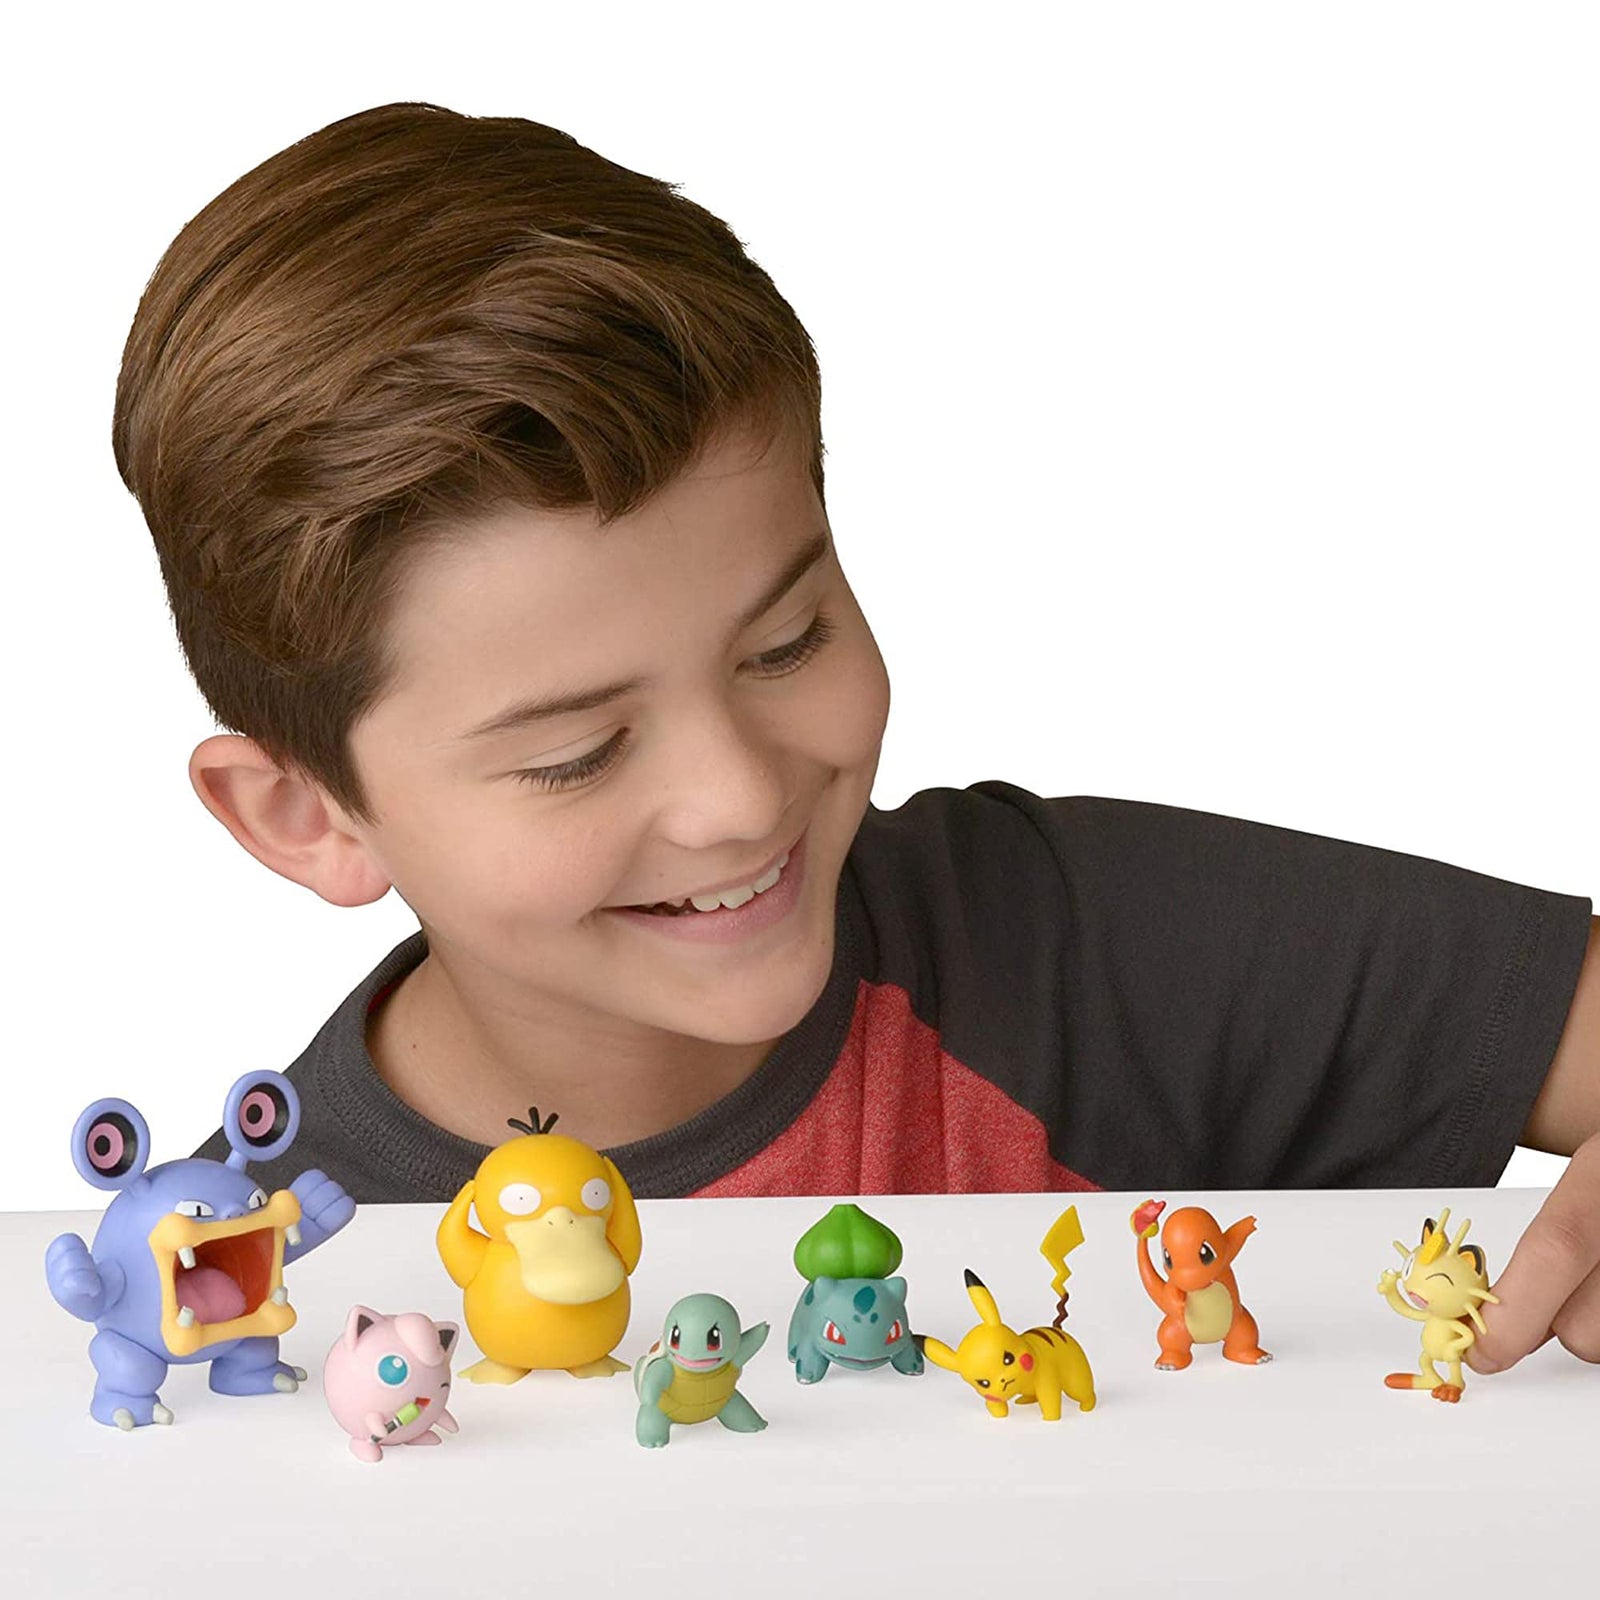 Pokemon Battle Figure 8-Pack - Comes with 2” Pikachu, 2” Bulbasaur, 2” Squirtle, 2” Charmander, 2” Meowth, 2" Jigglypuff, 3” Loudred, and 3” Psyduck